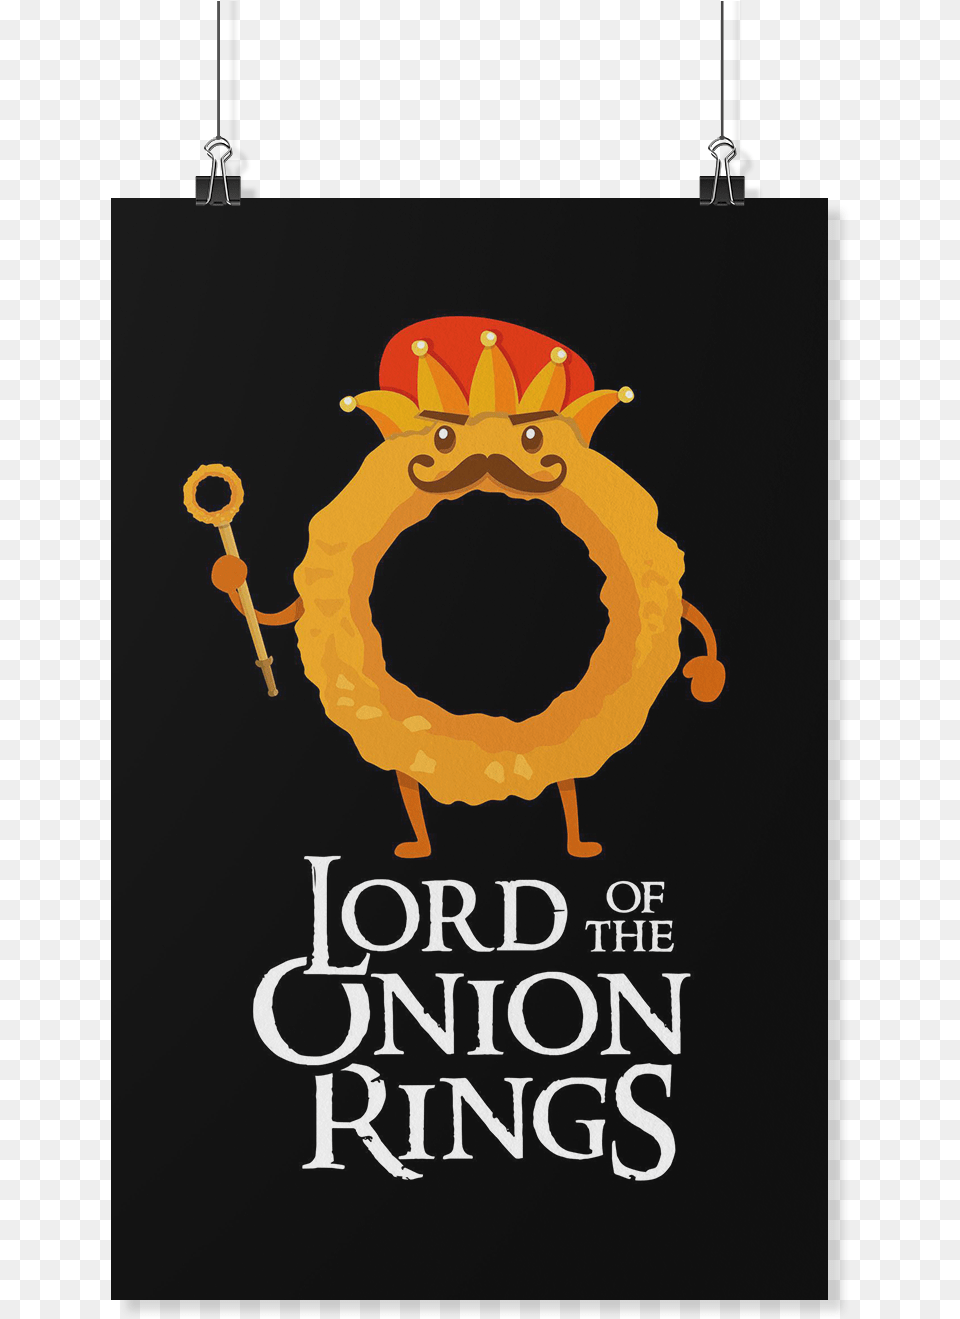 Lord Onion Rings Poster, Advertisement, Book, Publication, Animal Png